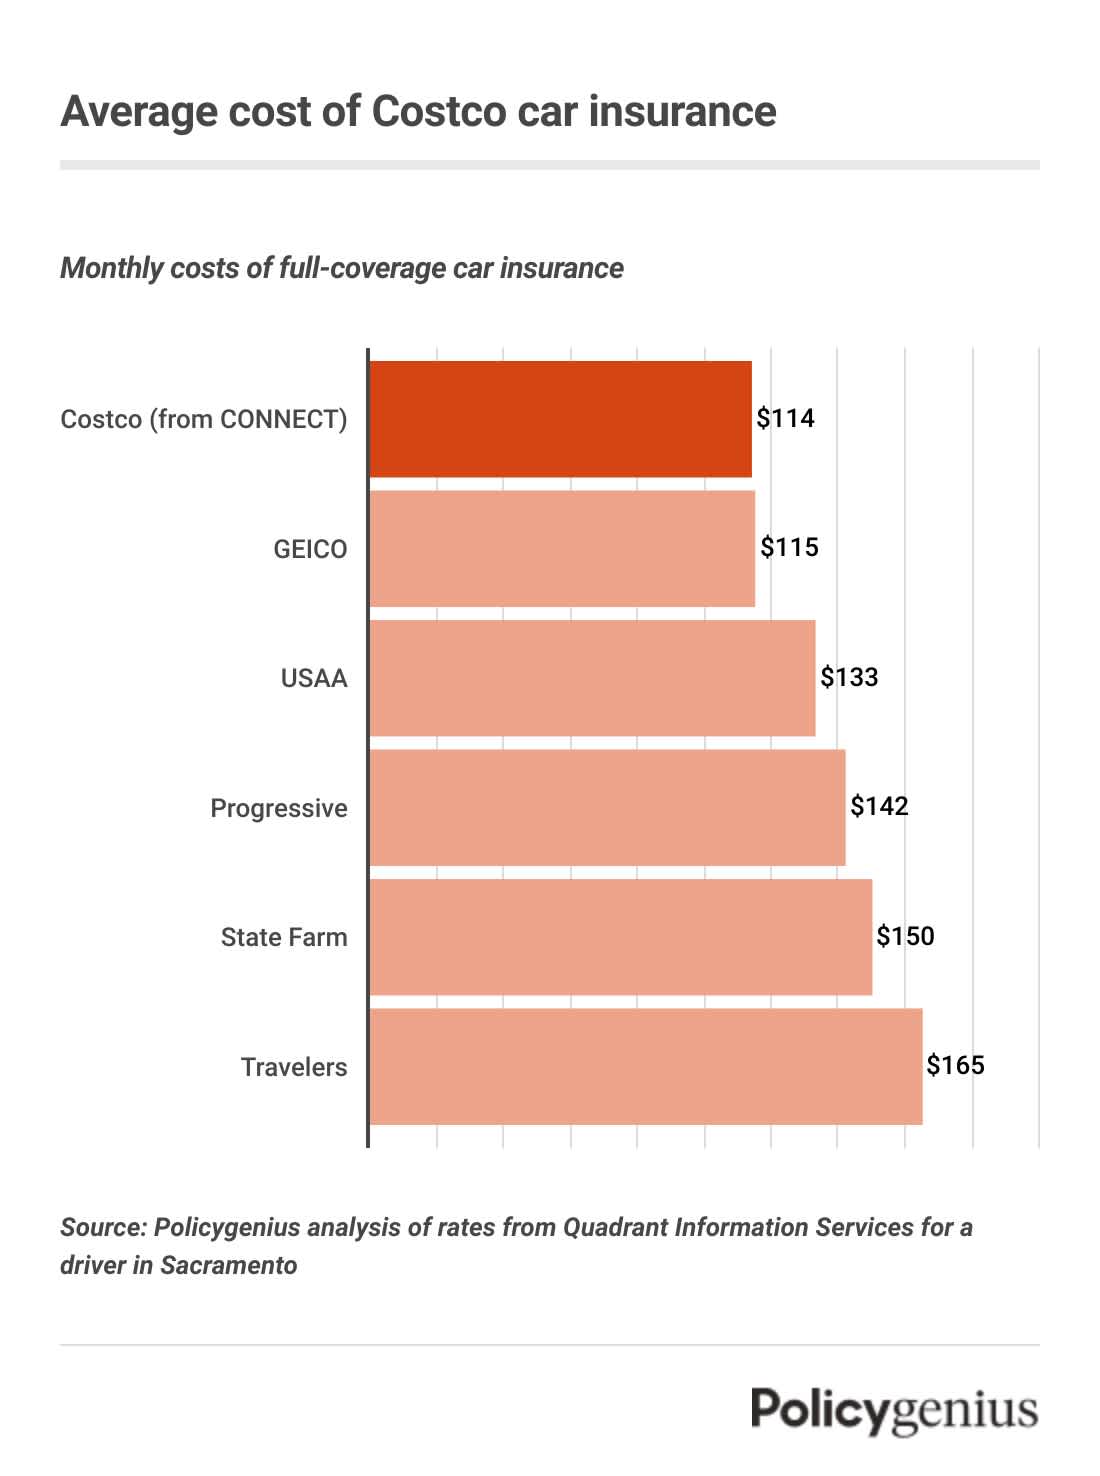 A bar graph showing the average cost of car insurance from Costco and CONNECT.